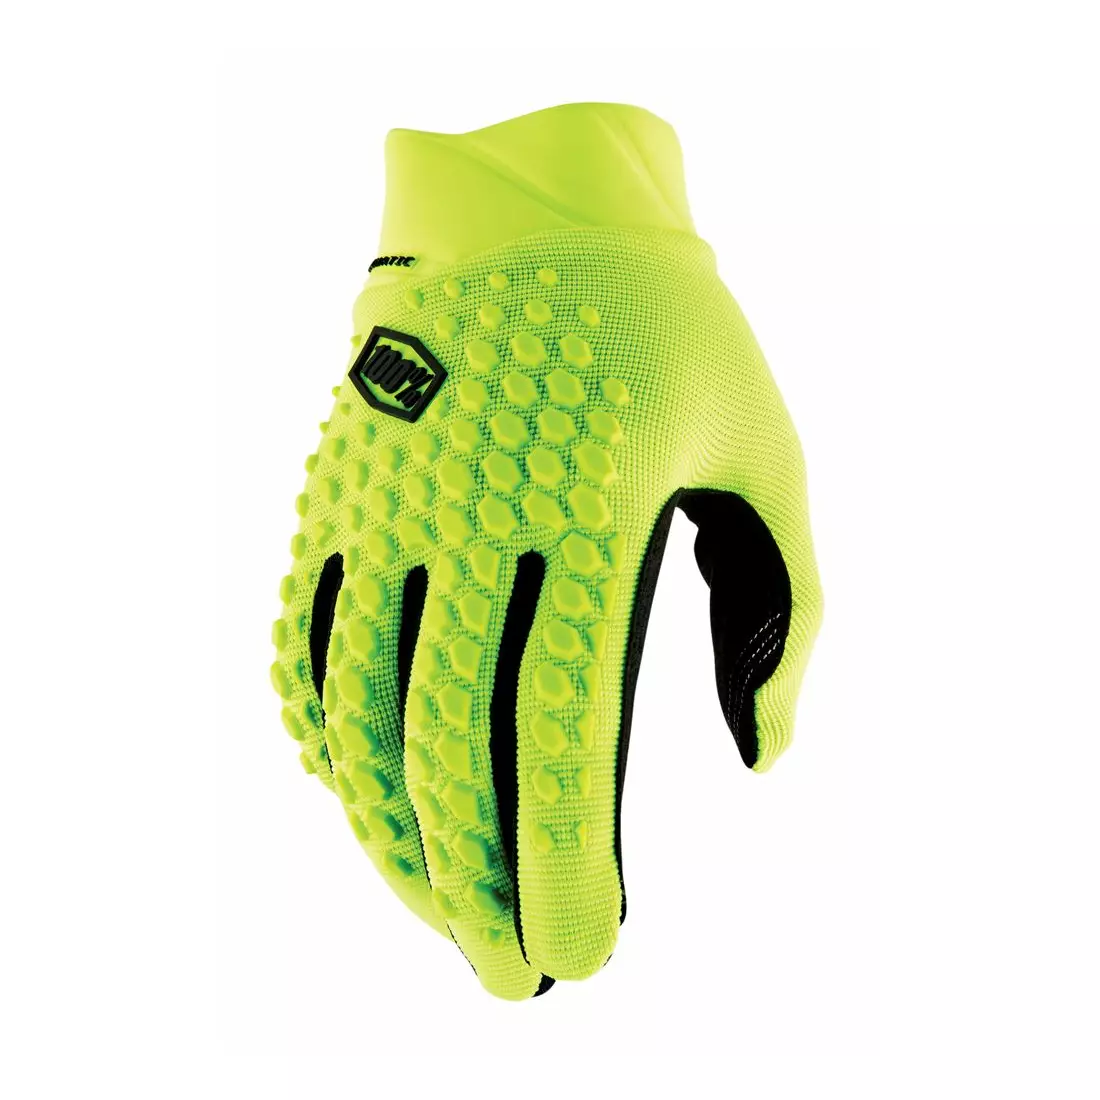 100% GEOMATIC men's cycling gloves, yellow